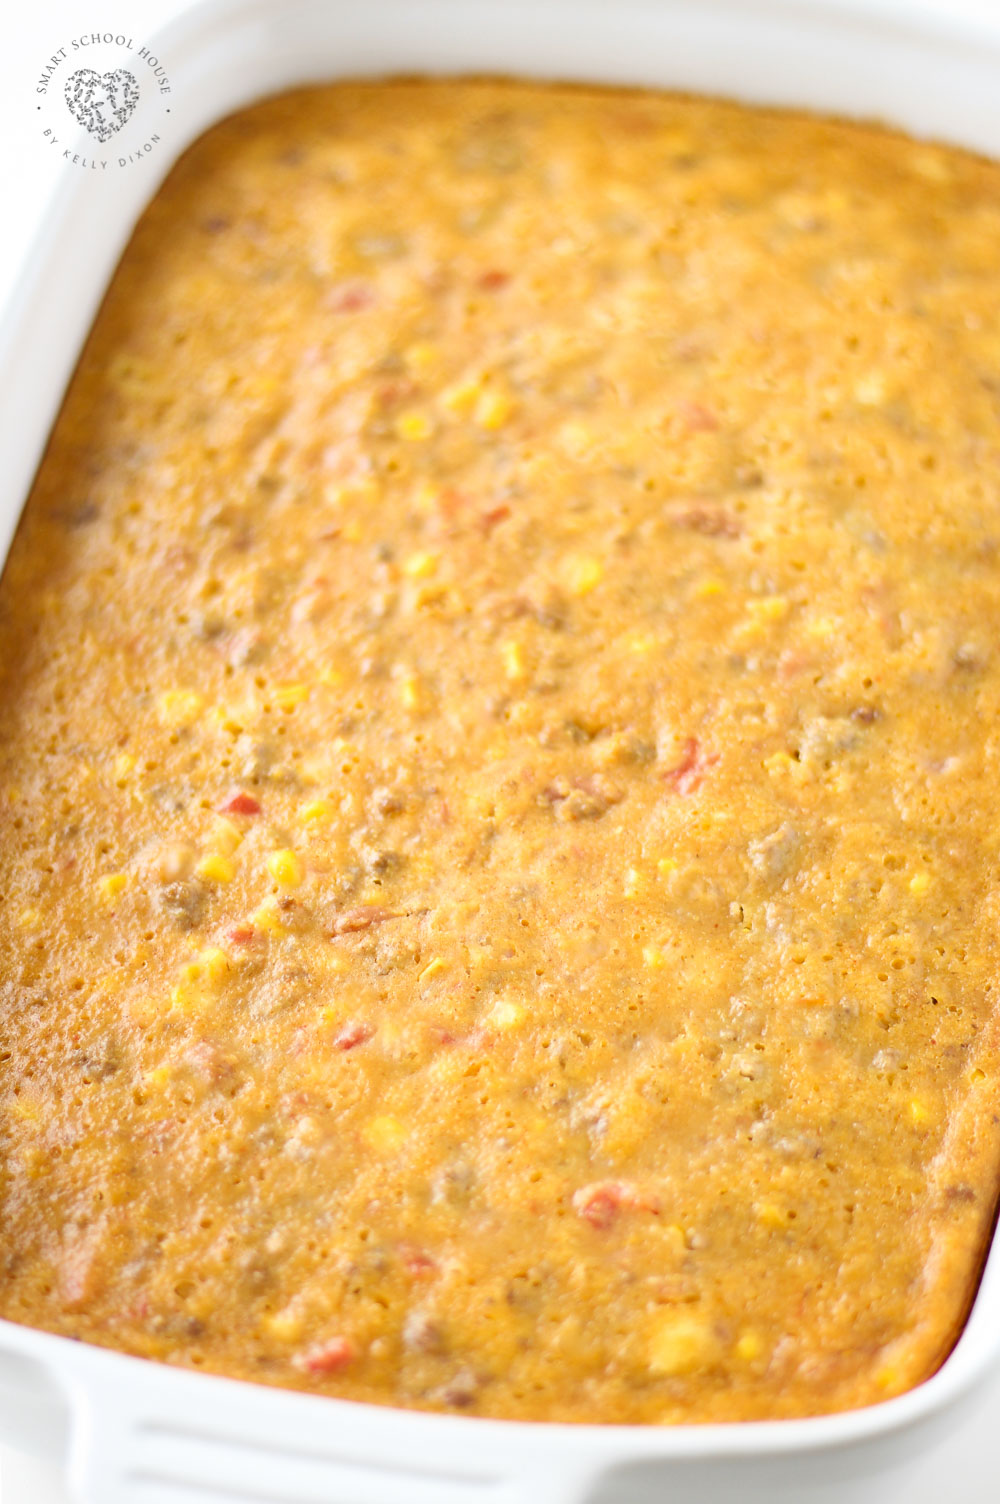 Cowboy Cornbread Casserole layers ground beef, beans, corn, cheese, seasonings, and cornbread batter into a hearty meal that everyone loves!